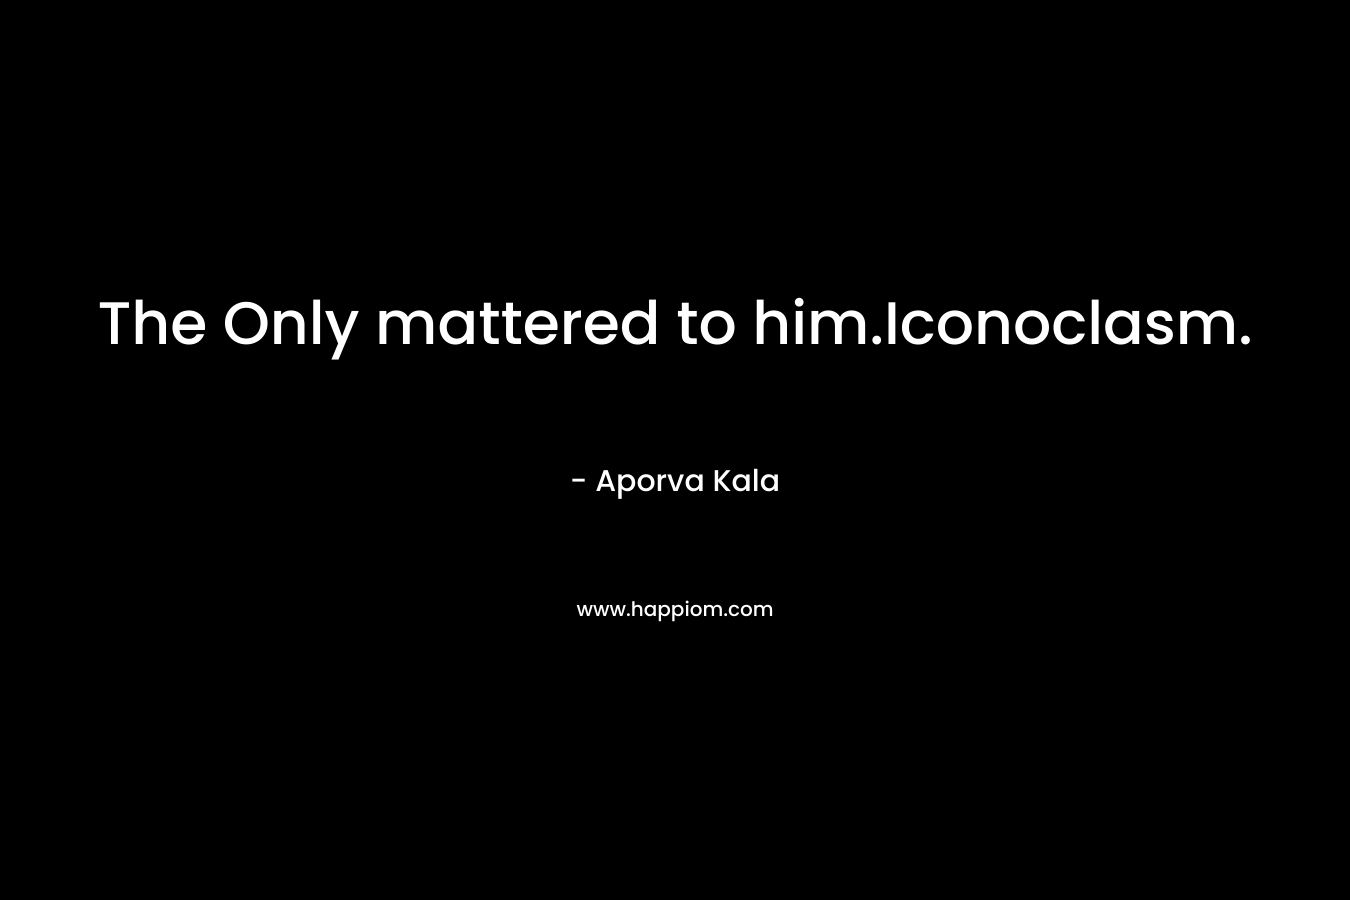 The Only mattered to him.Iconoclasm. – Aporva Kala